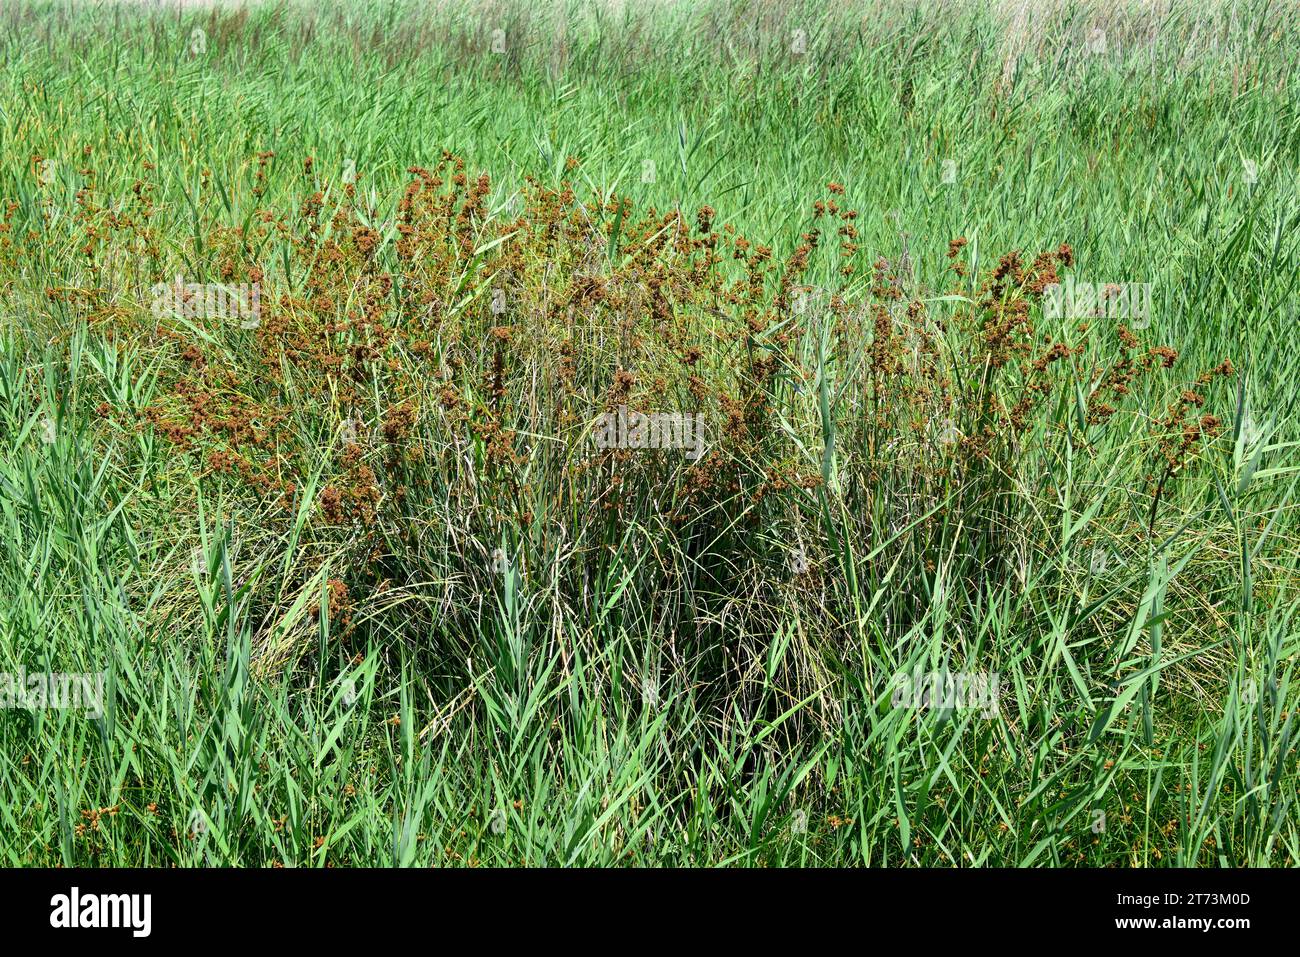 Lakeshore bulrush (Scirpus lacustris or Schoenoplectus lacustris) is a perennial plant native to lagoons of Europe, Asia and northern Africa. This pho Stock Photo